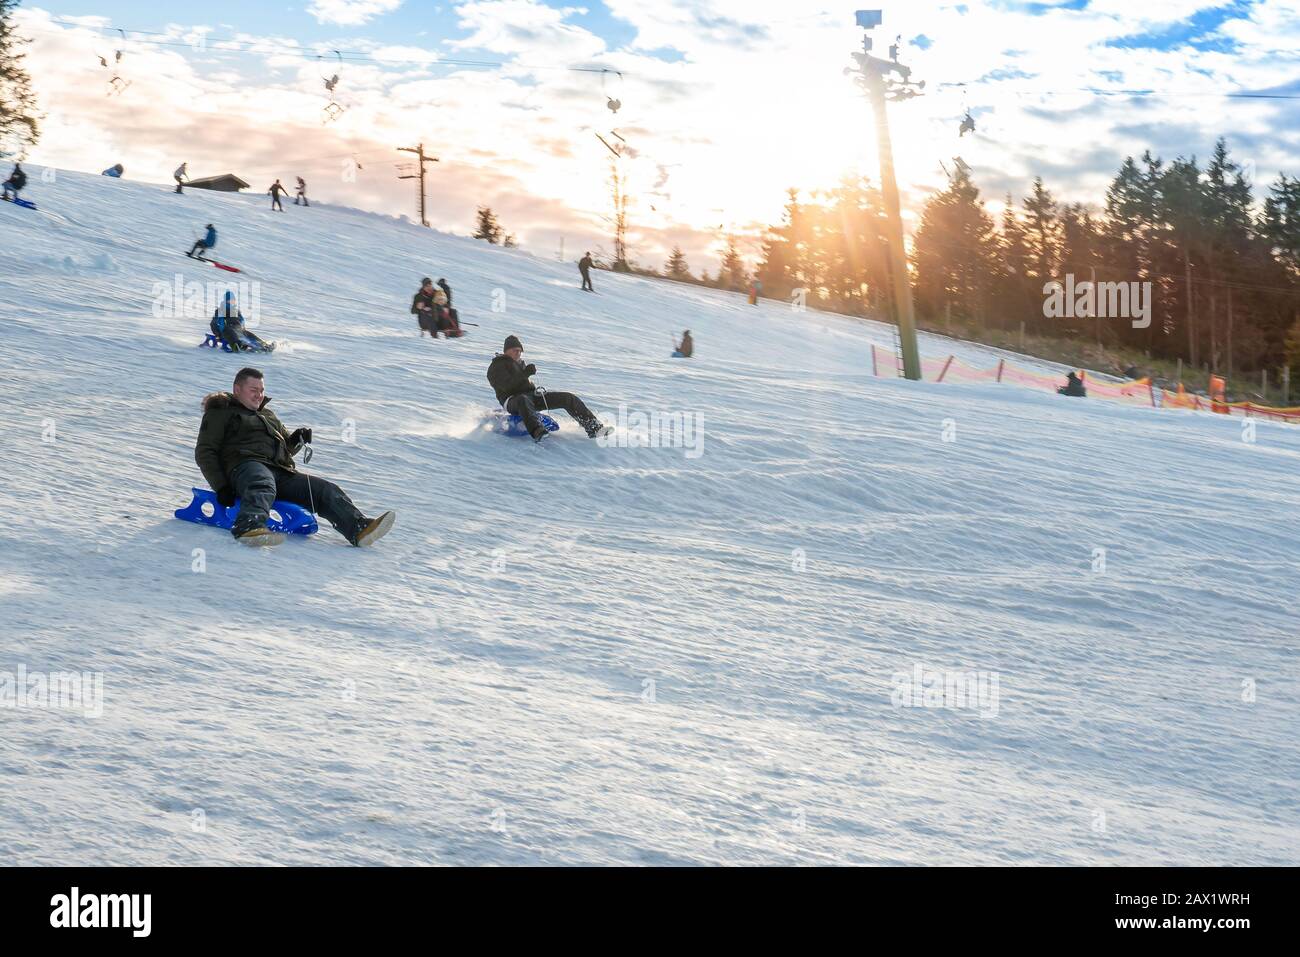 Winterberg, North Rhine Westphalia / Germany - December 30th 2019: There is a toboggan lift on the Sahnehang. Winter fun for families in the sunshine. Stock Photo